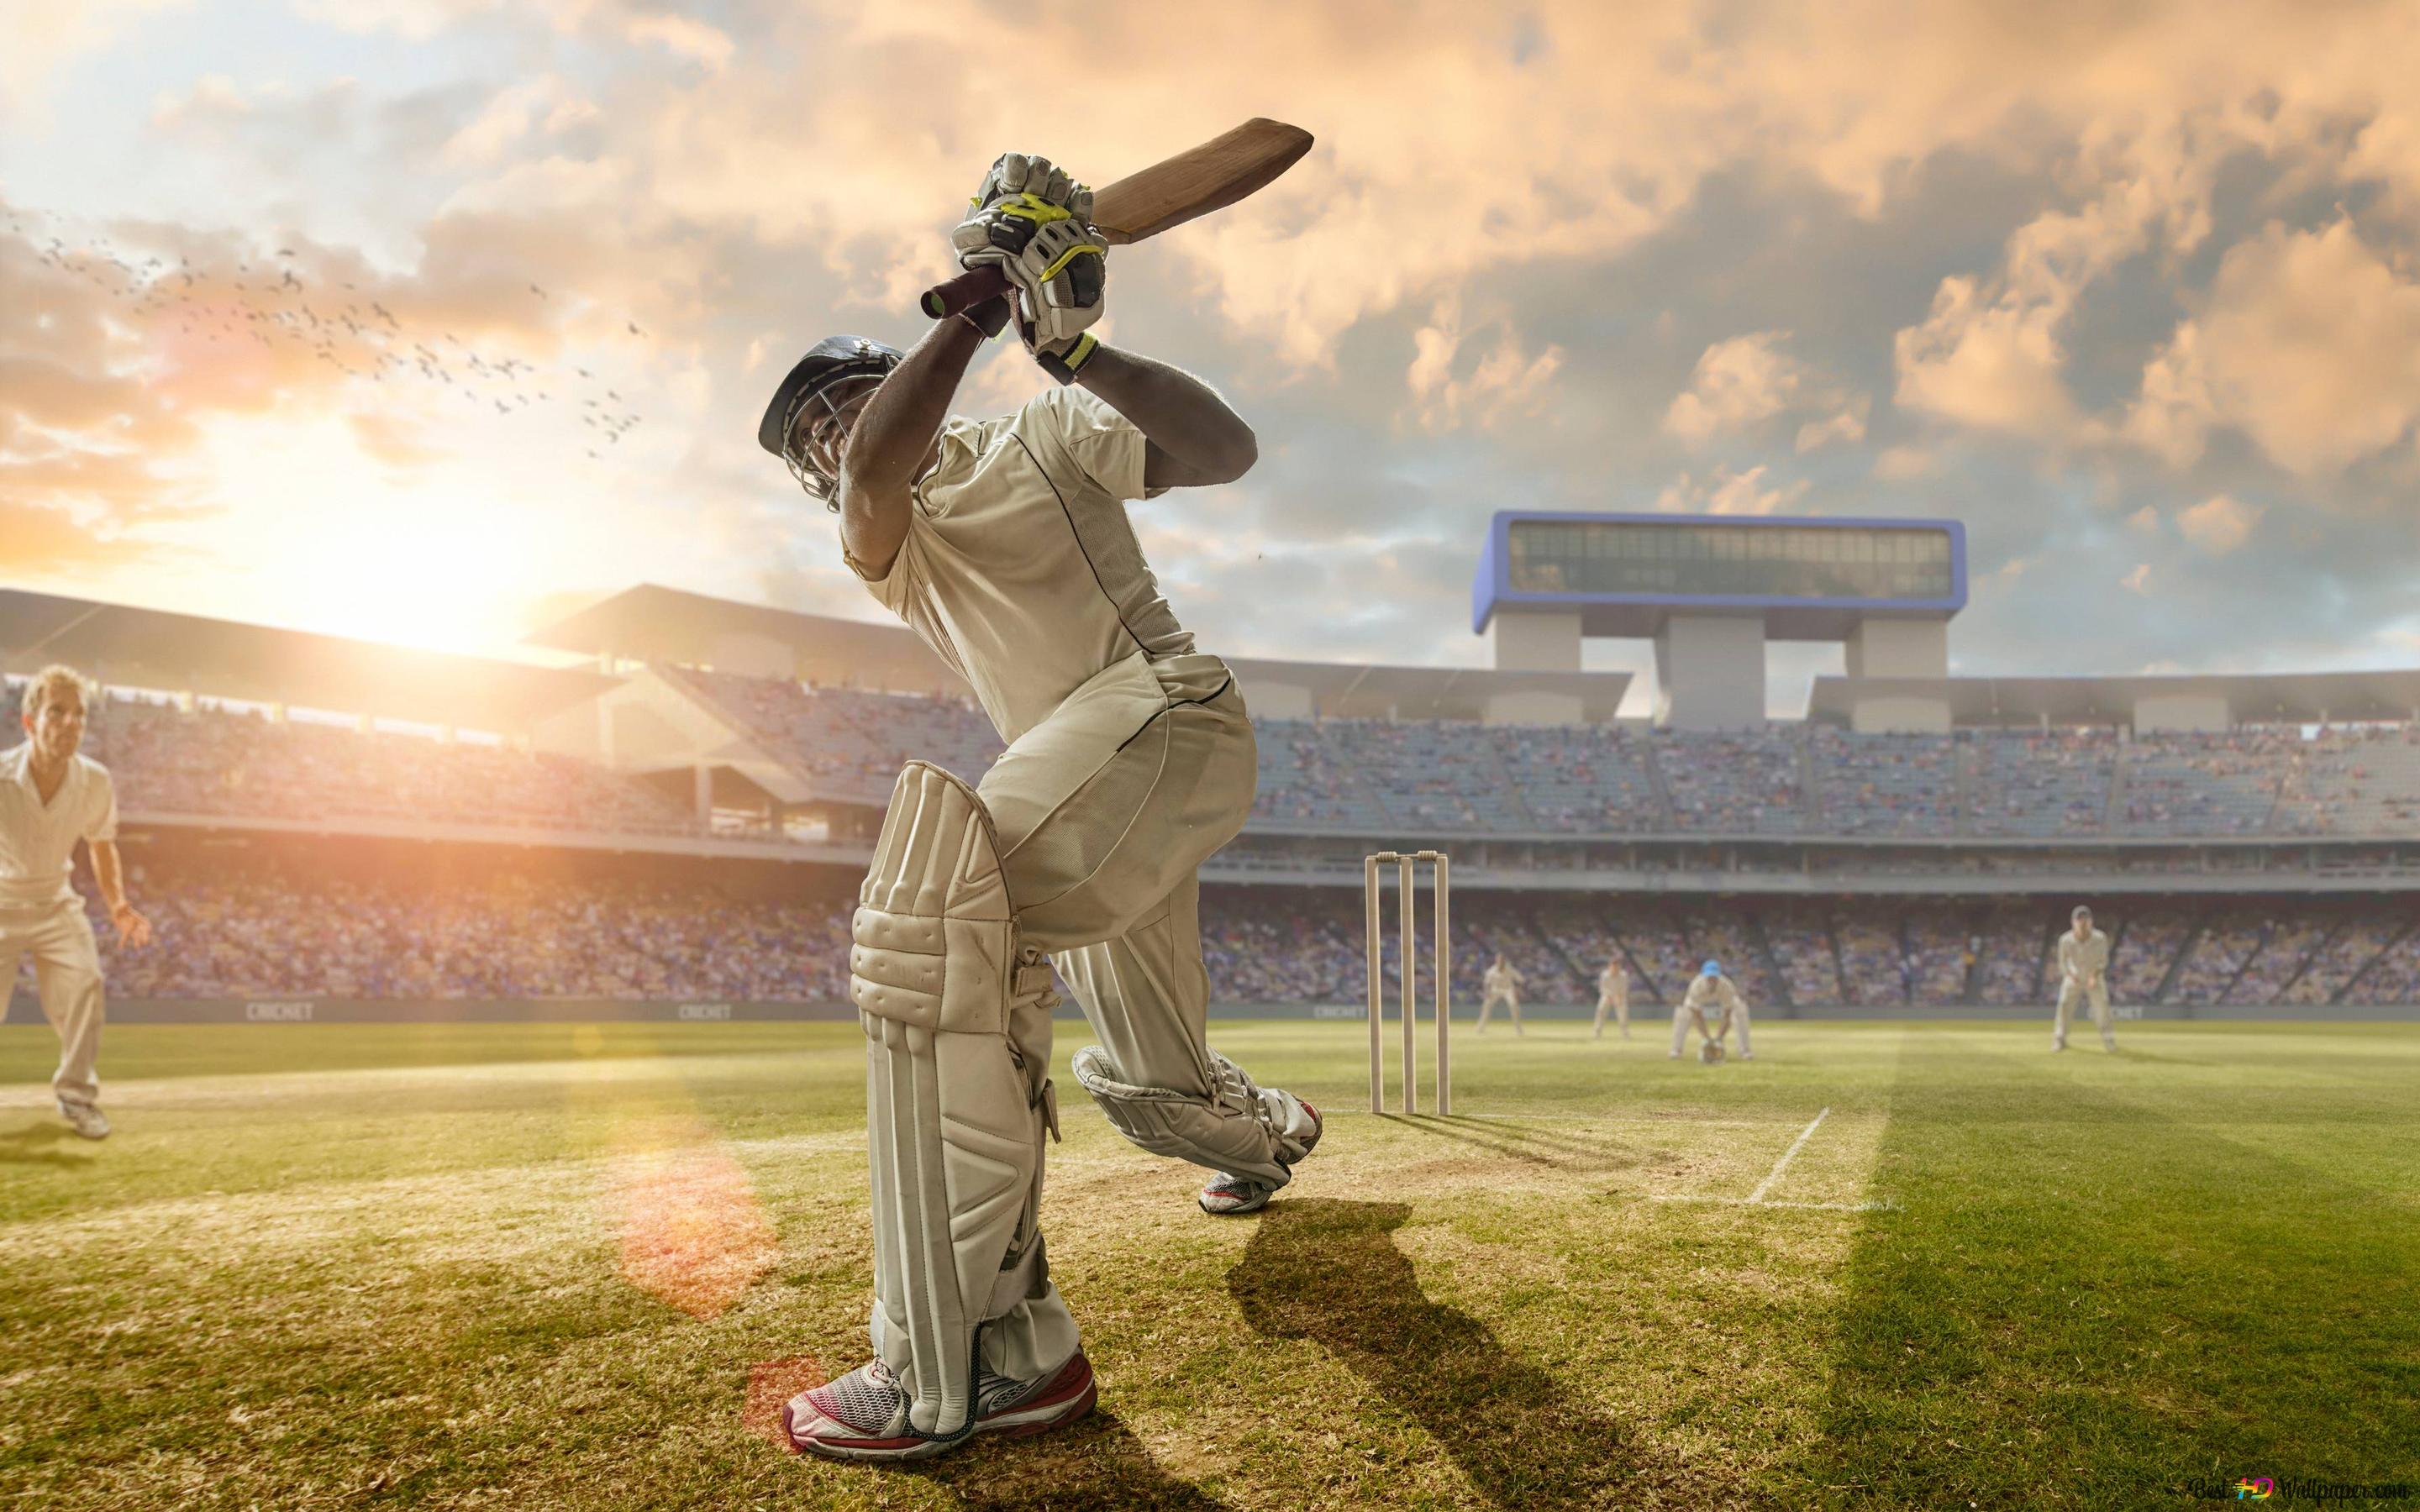 Player wearing protective gear on the cricket pitch hits the ball with a stick 4K wallpaper download